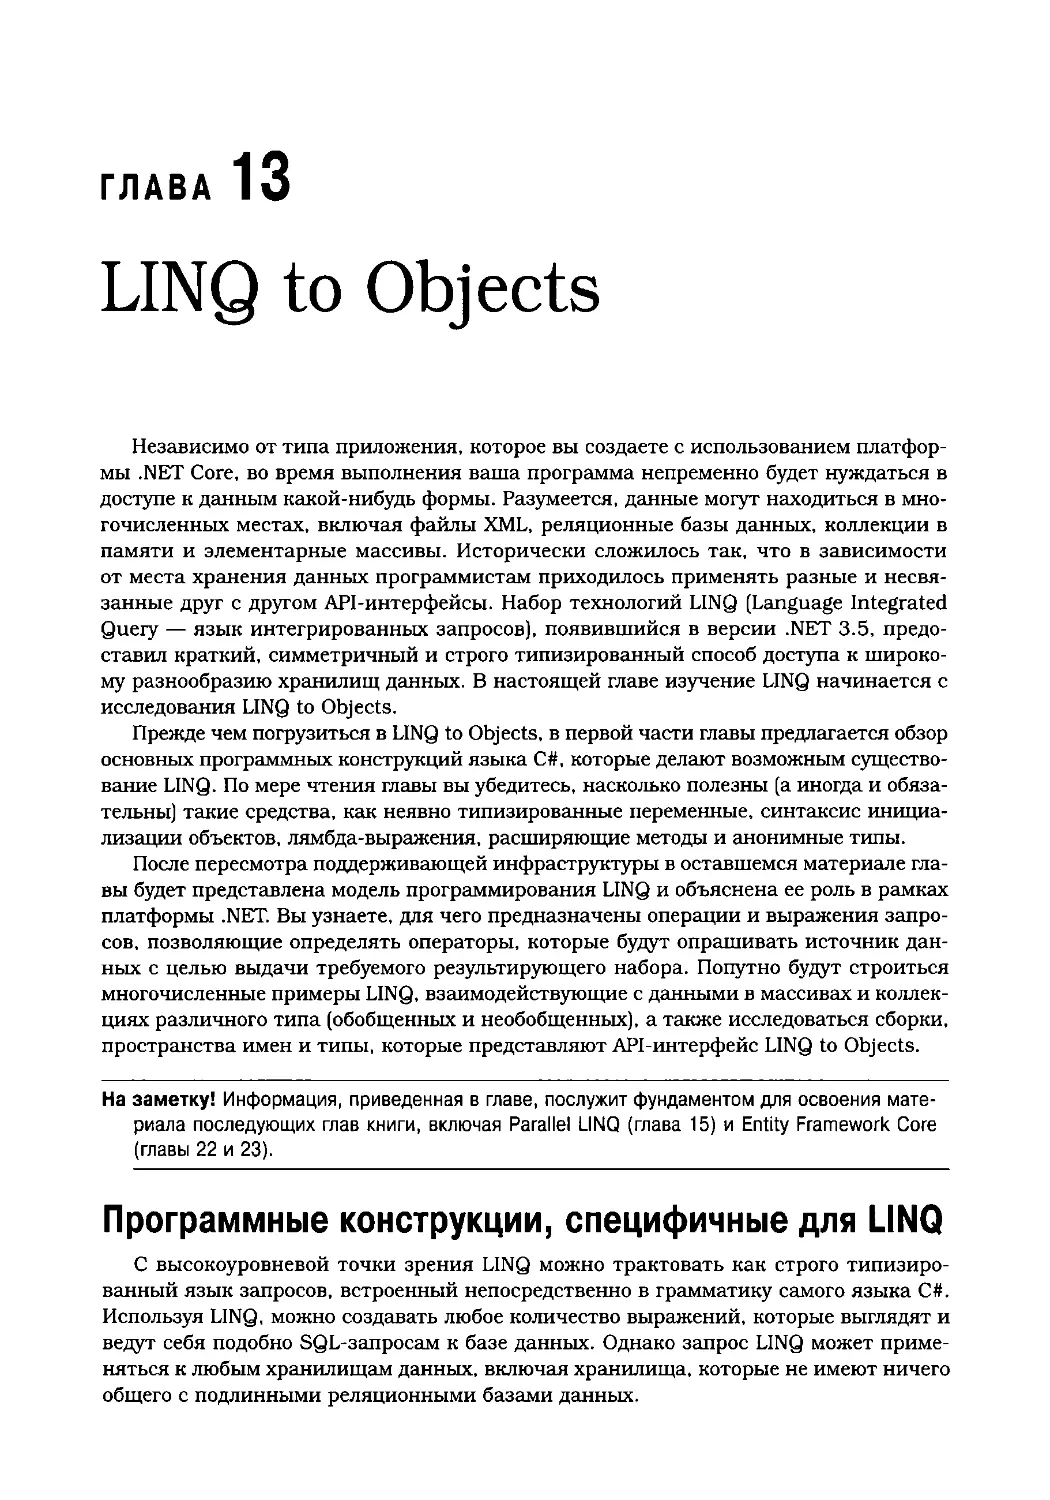 13. LINQ to Objects